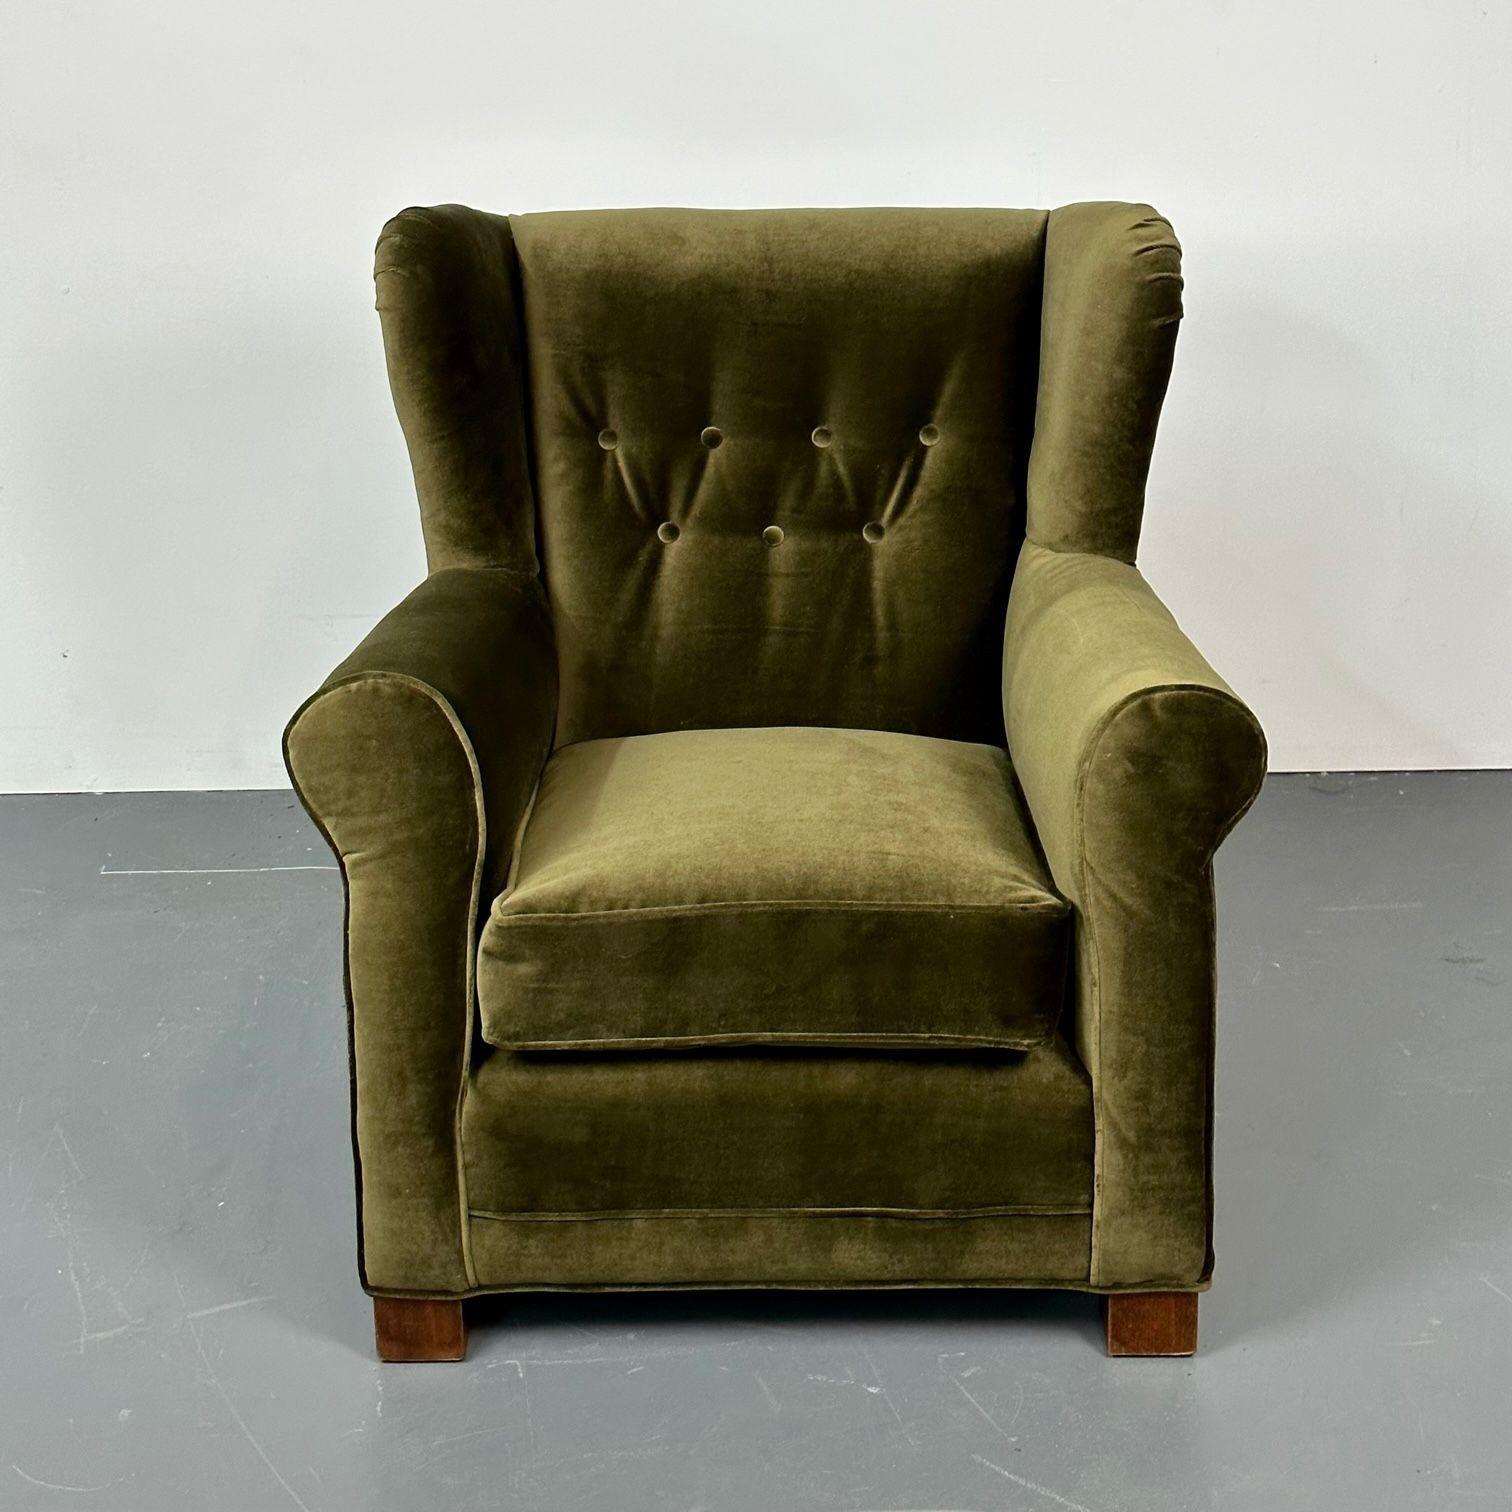 Danish Cabinetmaker Wingback / Lounge Chair, Scroll Arm, Fritz Hansen Style
Green velvet wingback lounge chair designed and produced in Denmark, 1940s. Modern and oversized, this newly upholstered lounge chair will work great in either a mid-century